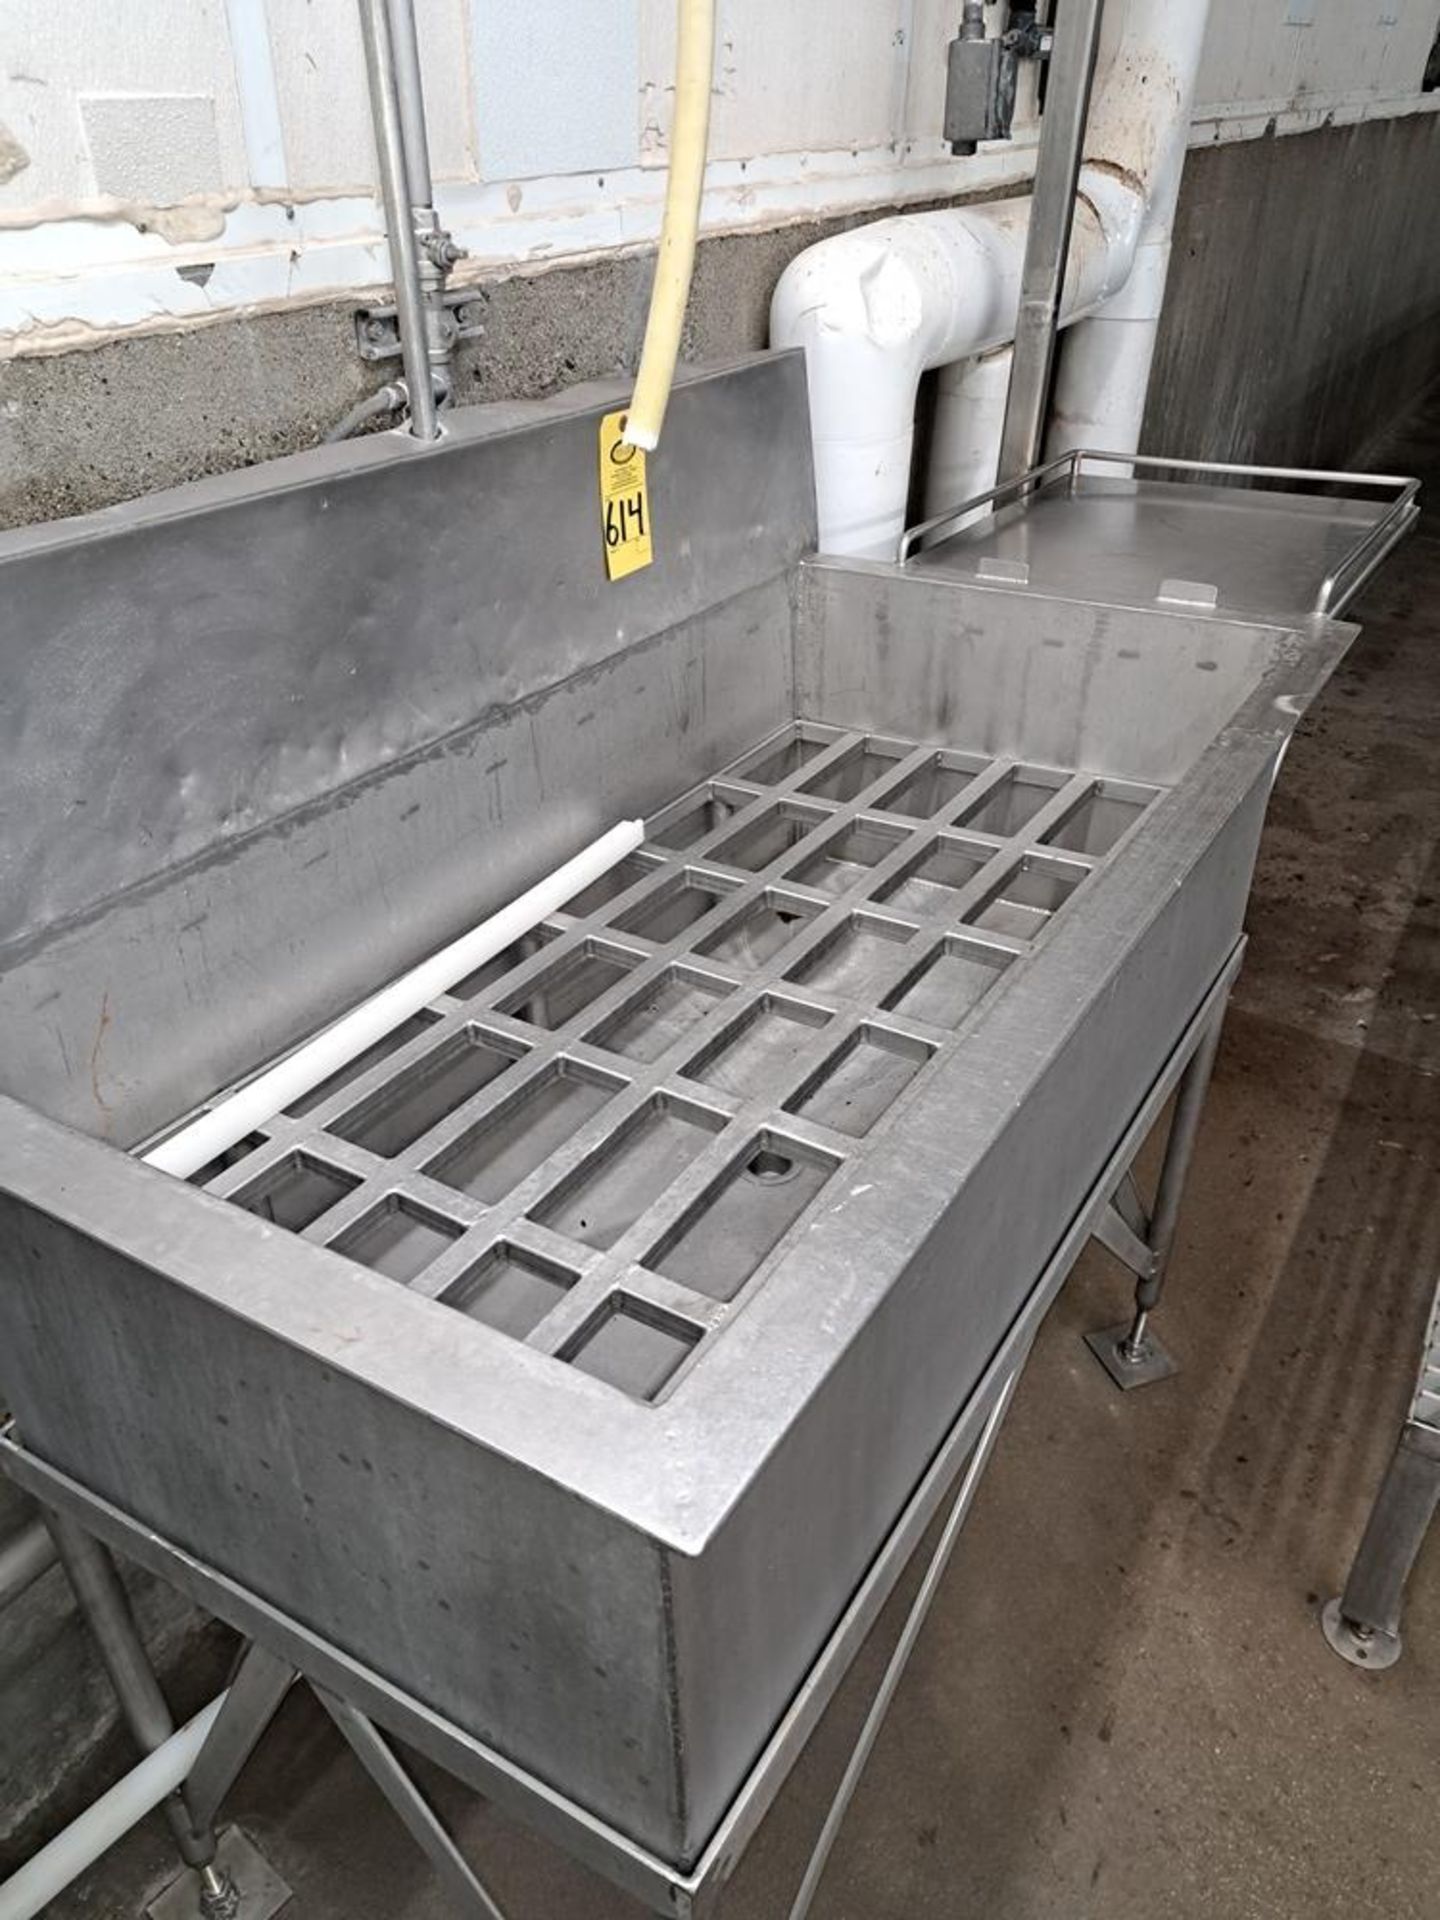 Stainless Steel Basin, 24" W X 4' L X 16" D side board: Required Loading Fee $200.00, Rigger-Norm - Image 2 of 2